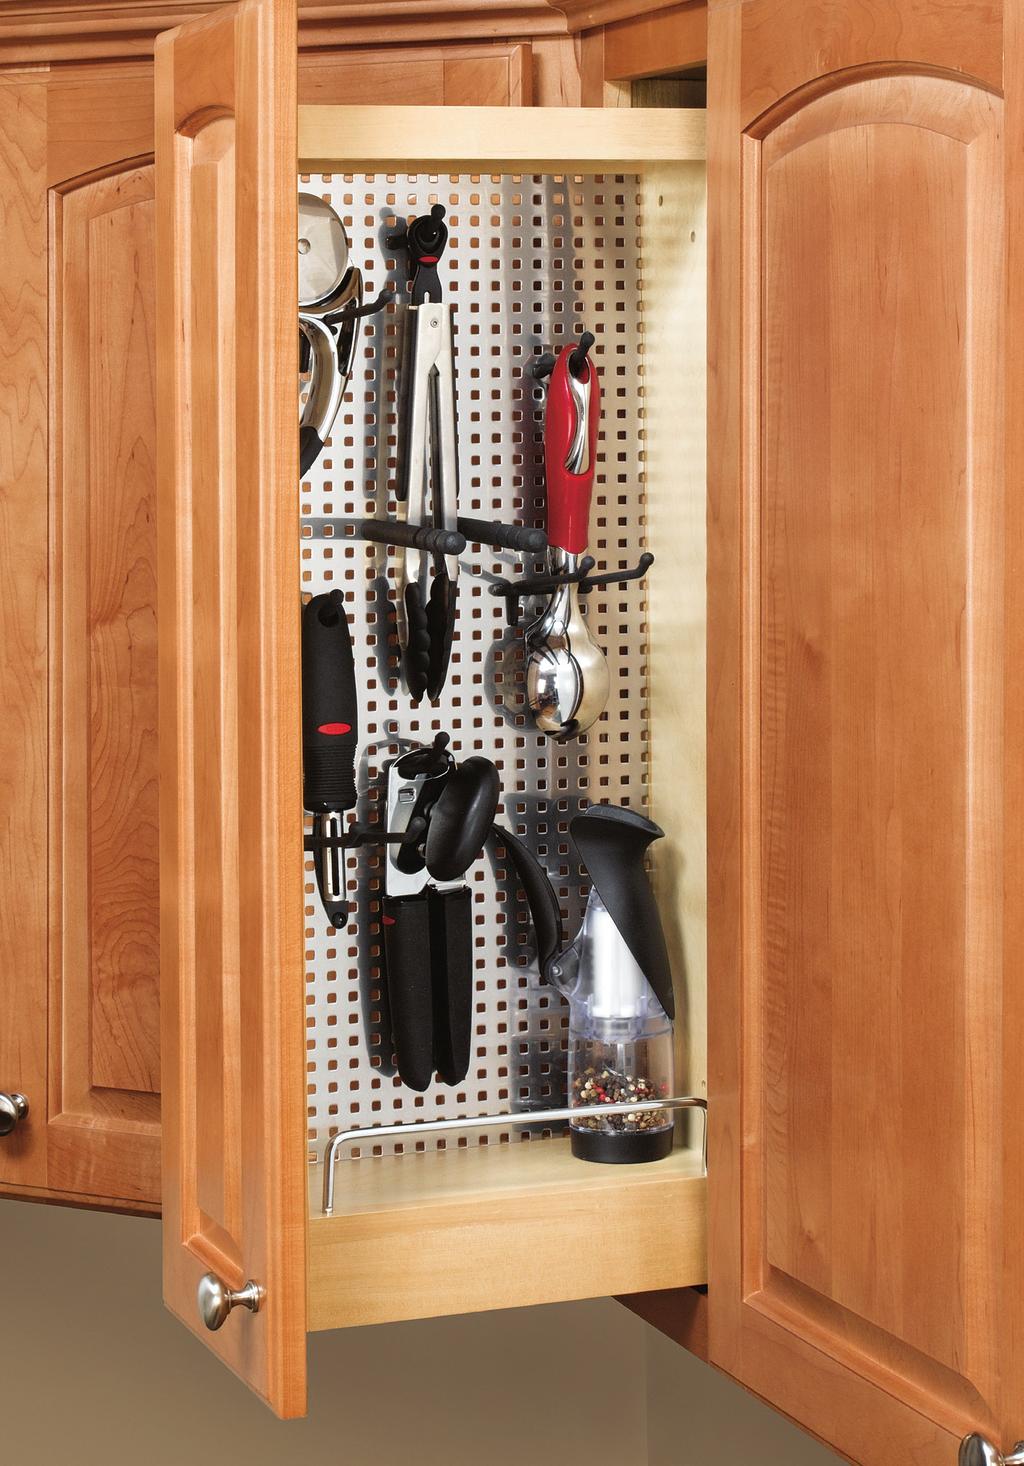 444 SERIES PULLOUT ORGANIZER Designed for full height 2" wall cabinets Patented adjustable door mount brackets that provides up to 5" adjustability (US Patent No.